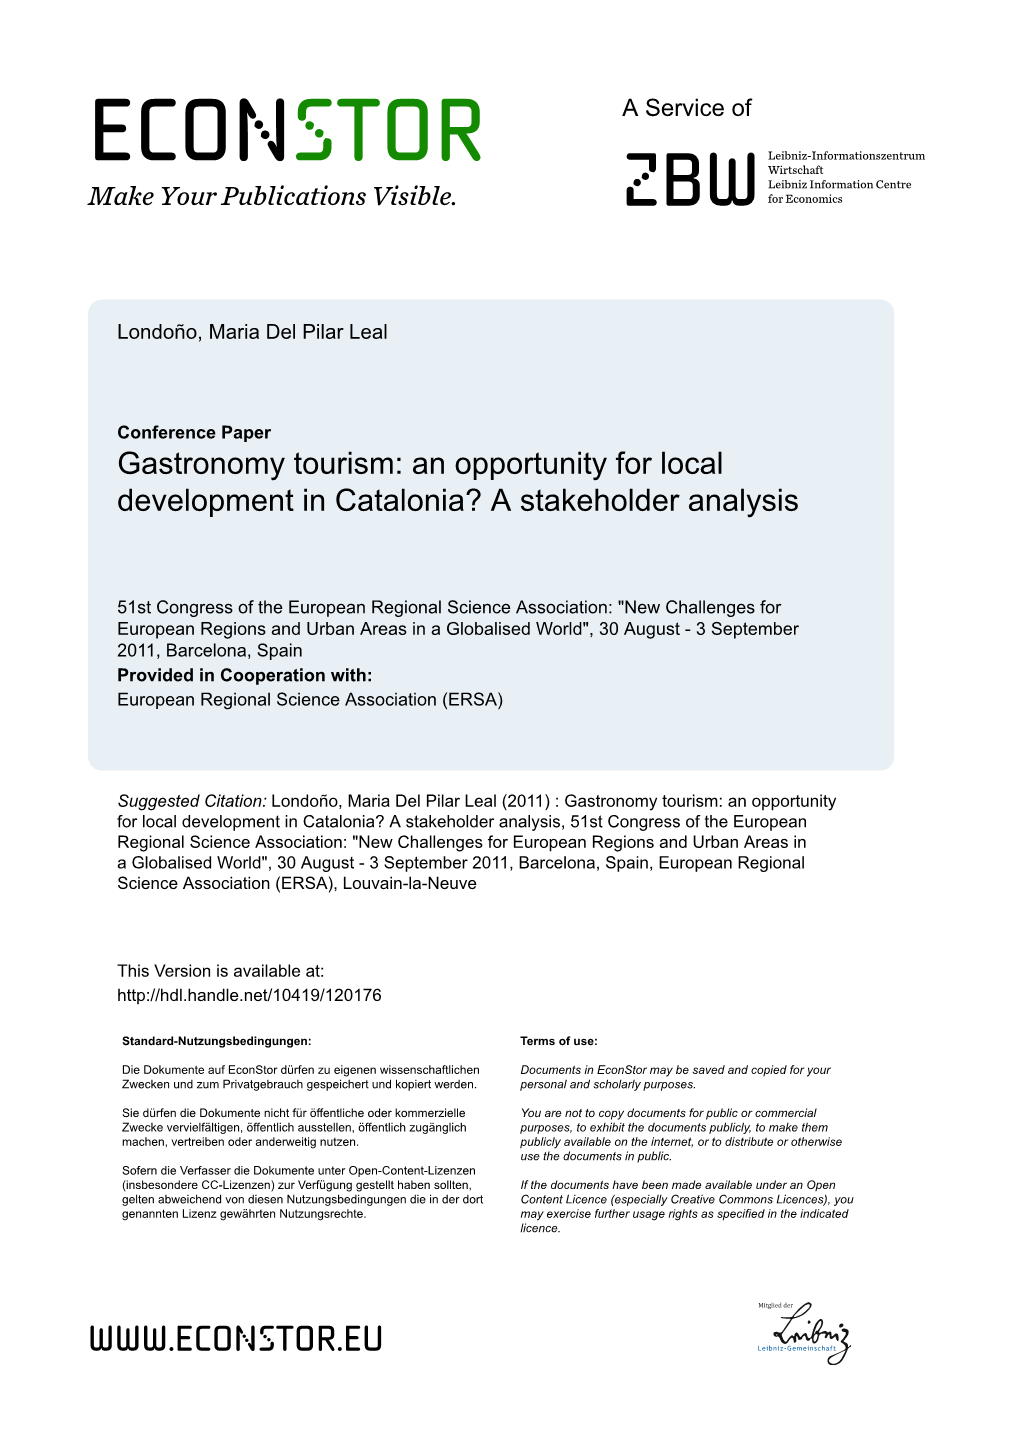 Gastronomy Tourism: an Opportunity for Local Development in Catalonia? a Stakeholder Analysis